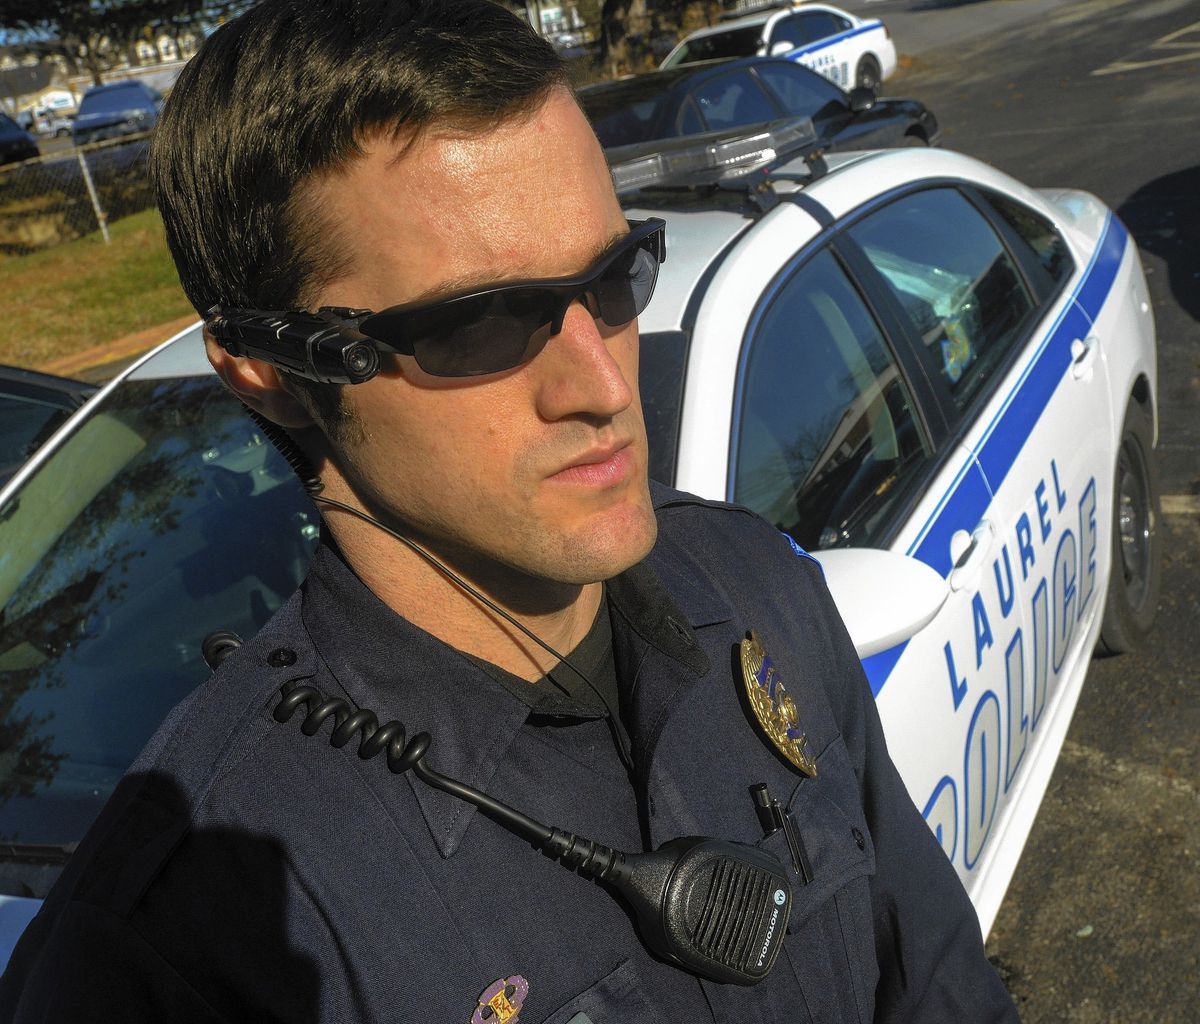 More police now sporting cameras on their bodies